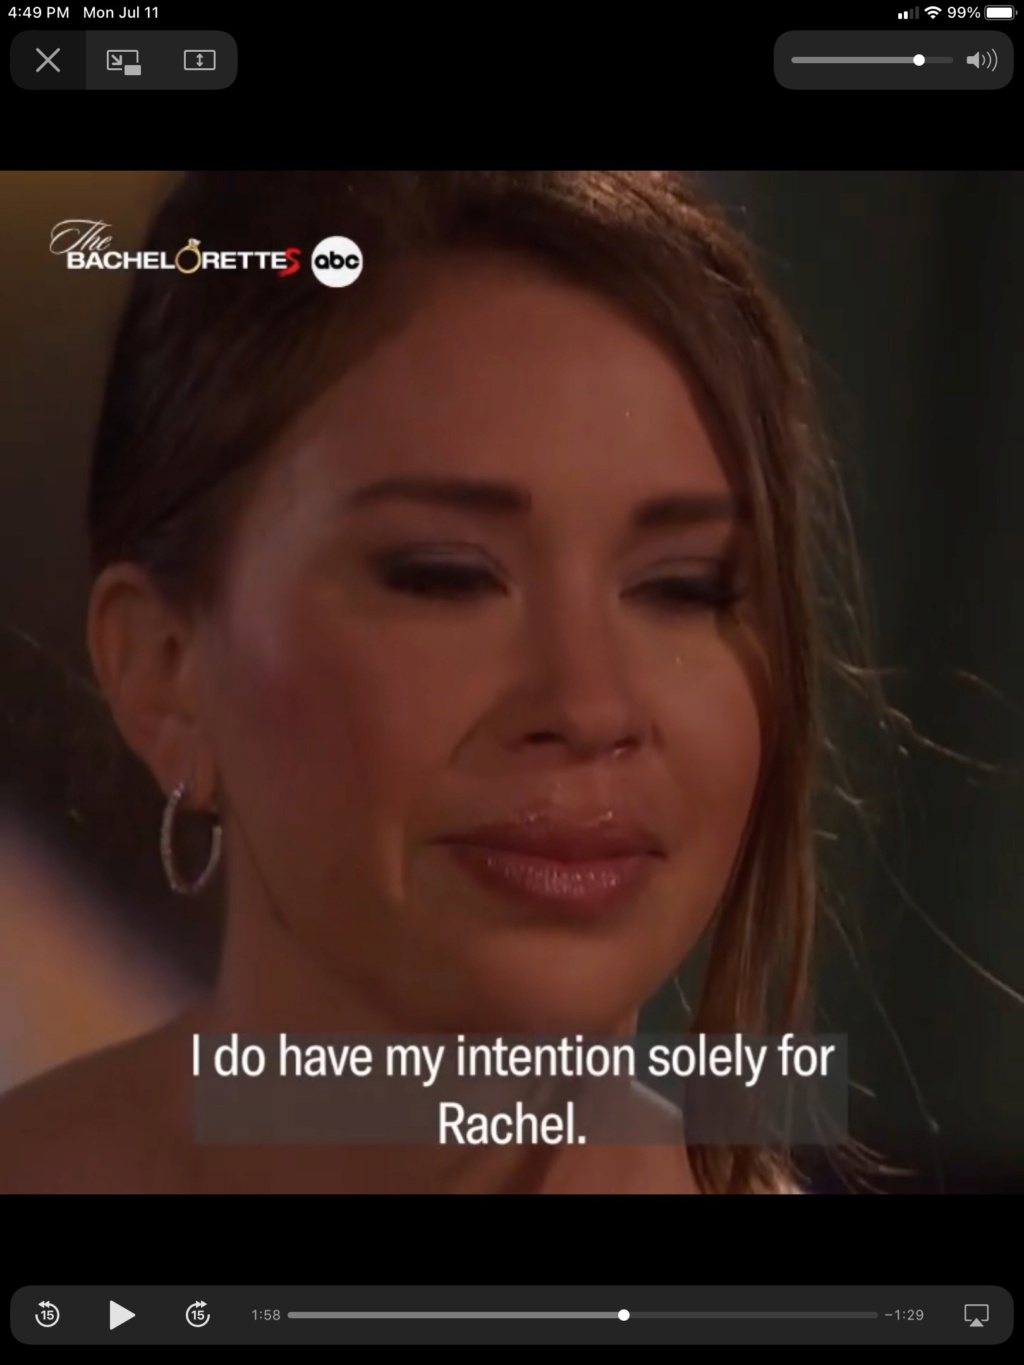 Bachelorette 19 - Gabby Windey - Rachel Recchia - SCaps - *Sleuthing Spoilers* - Page 4 F5ef5210